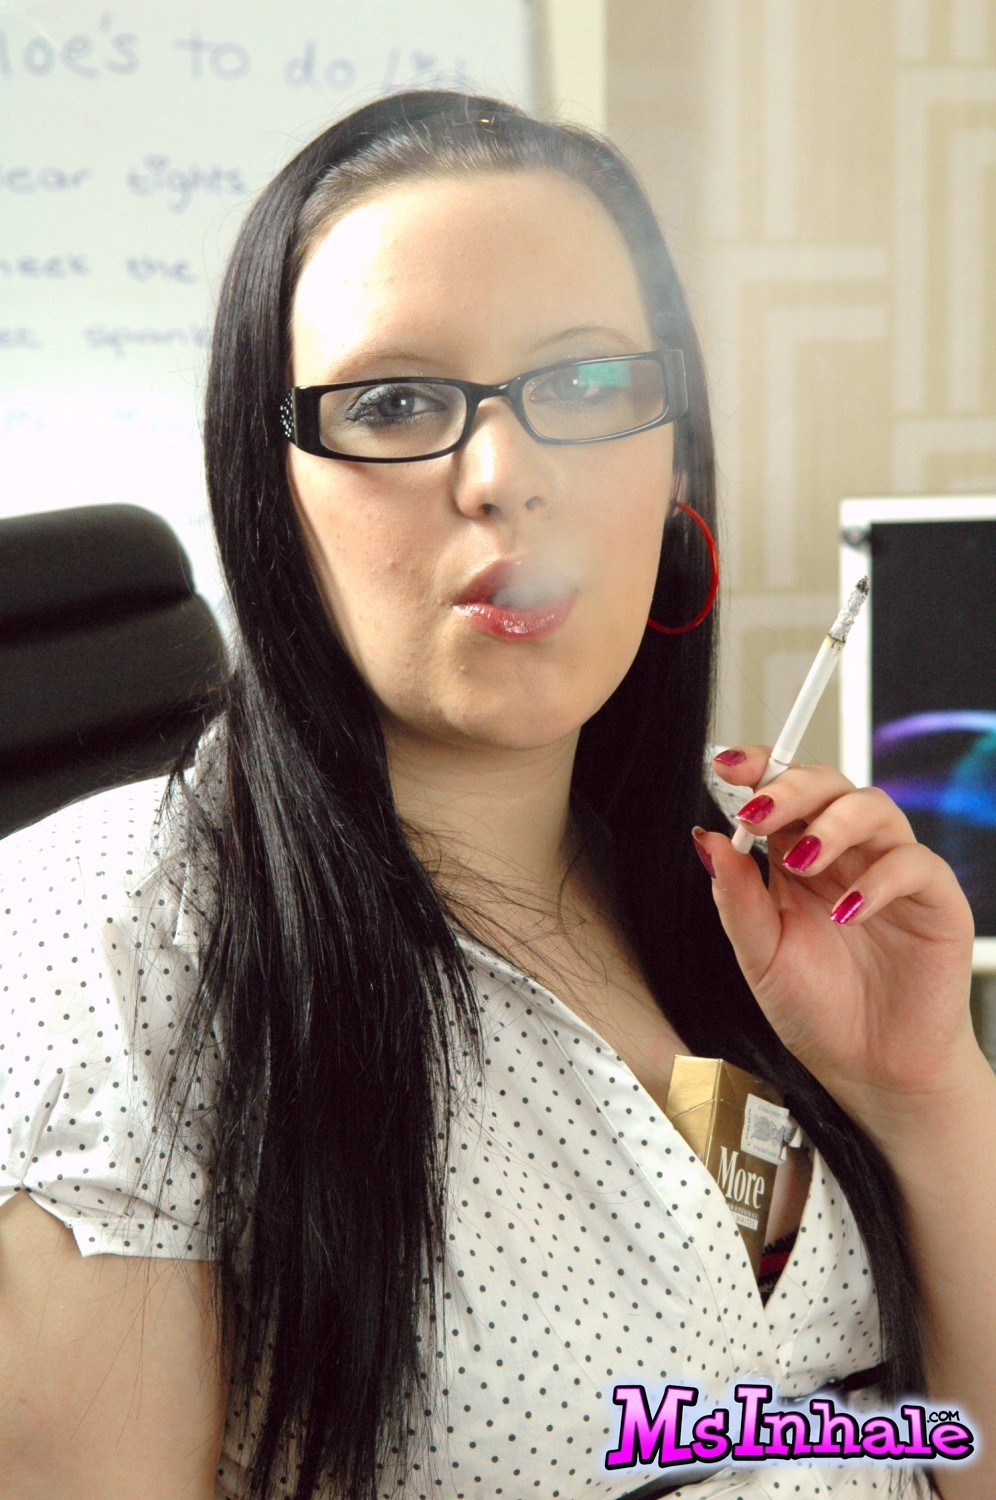 Teen secretary in glasses smoking a More 120 cigarette at work #70269211